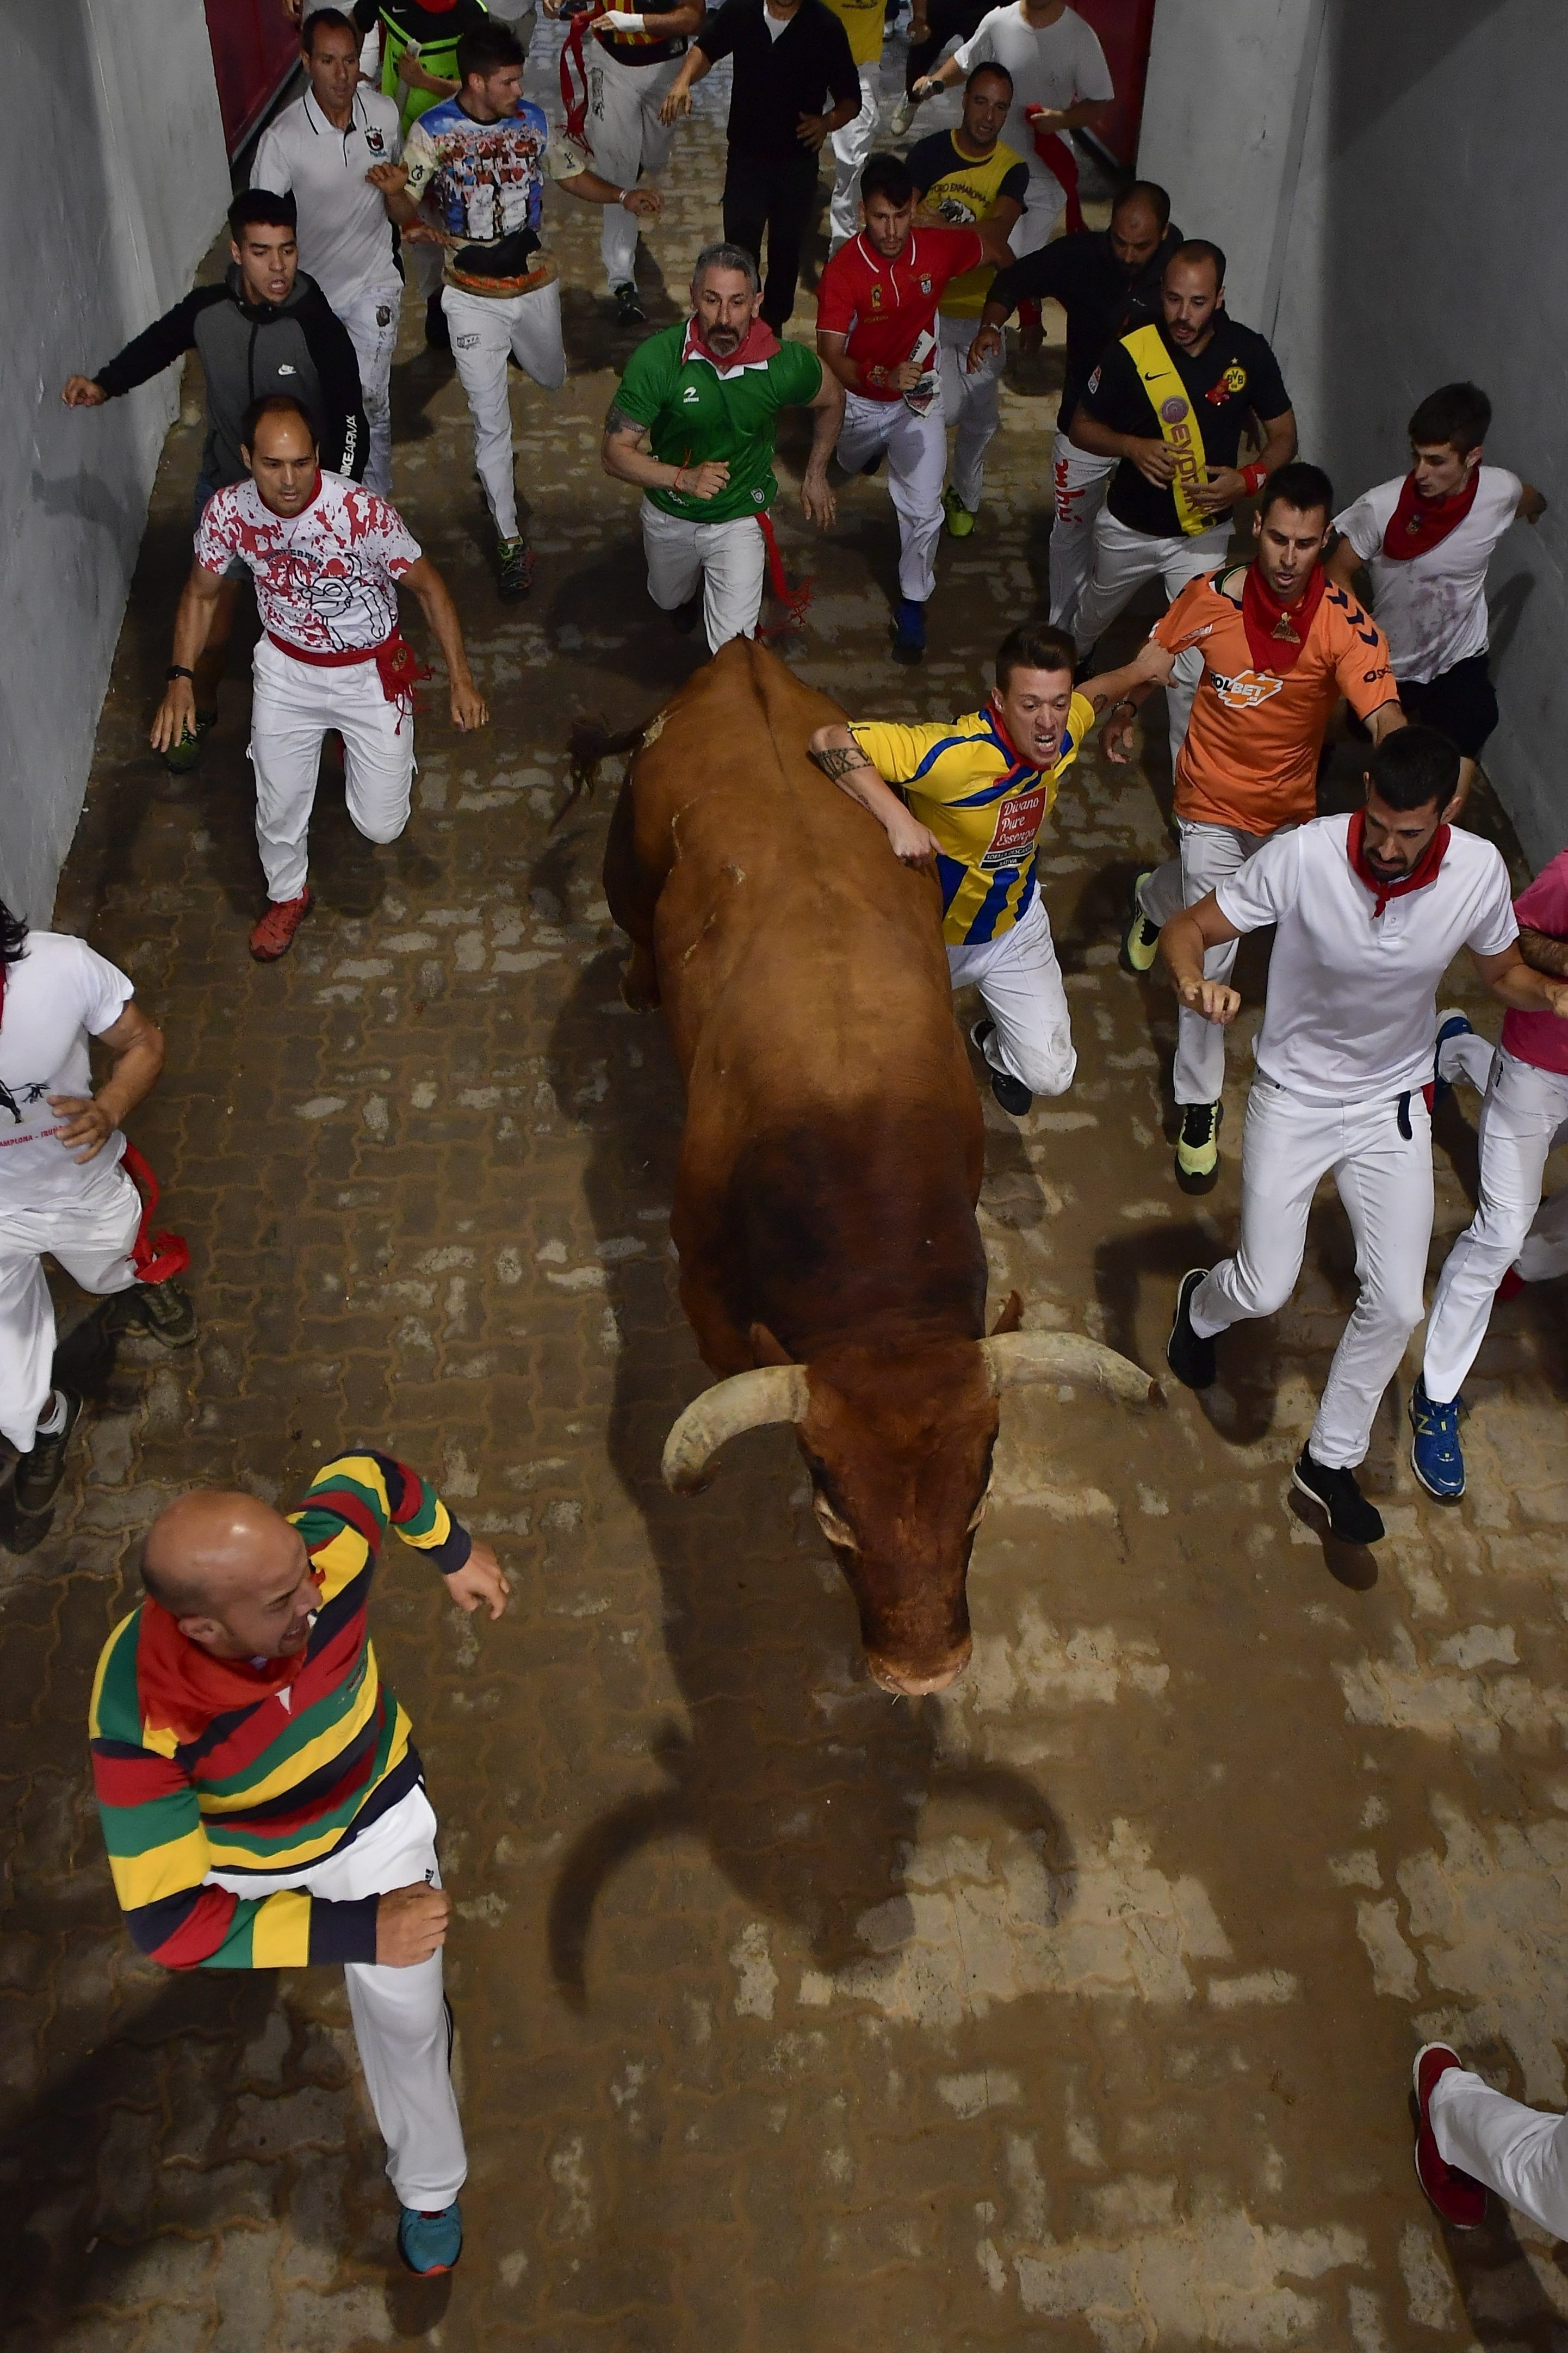 Revellers run next to a fighting bull during the running of the bulls at the San Fermin Festival, in Pamplona, northern Spain, Sunday, July 14, 2019. The San Fermin fiesta made internationally famous by Ernest Hemingway in his novel 